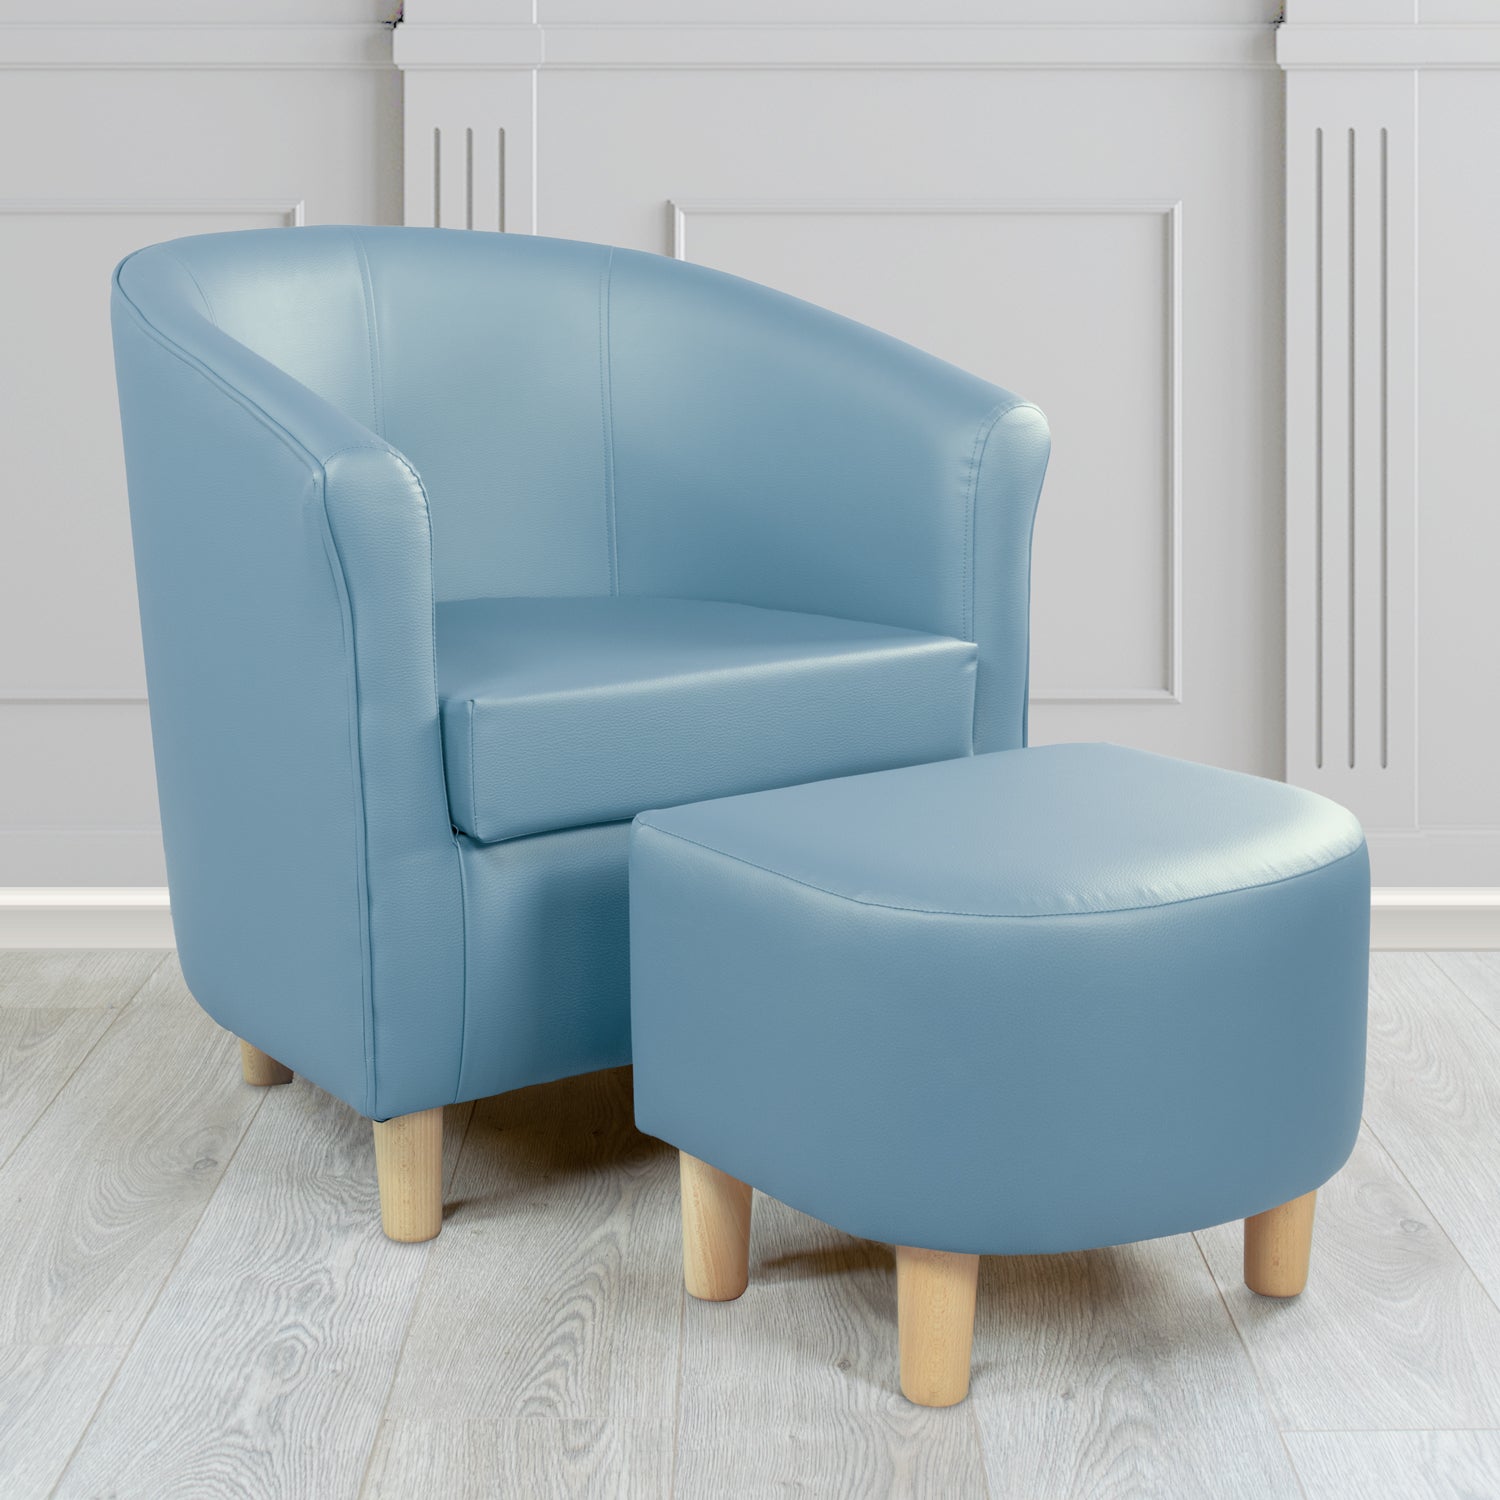 Tuscany Just Colour Cool Blue Faux Leather Tub Chair with Dee Footstool Set - The Tub Chair Shop